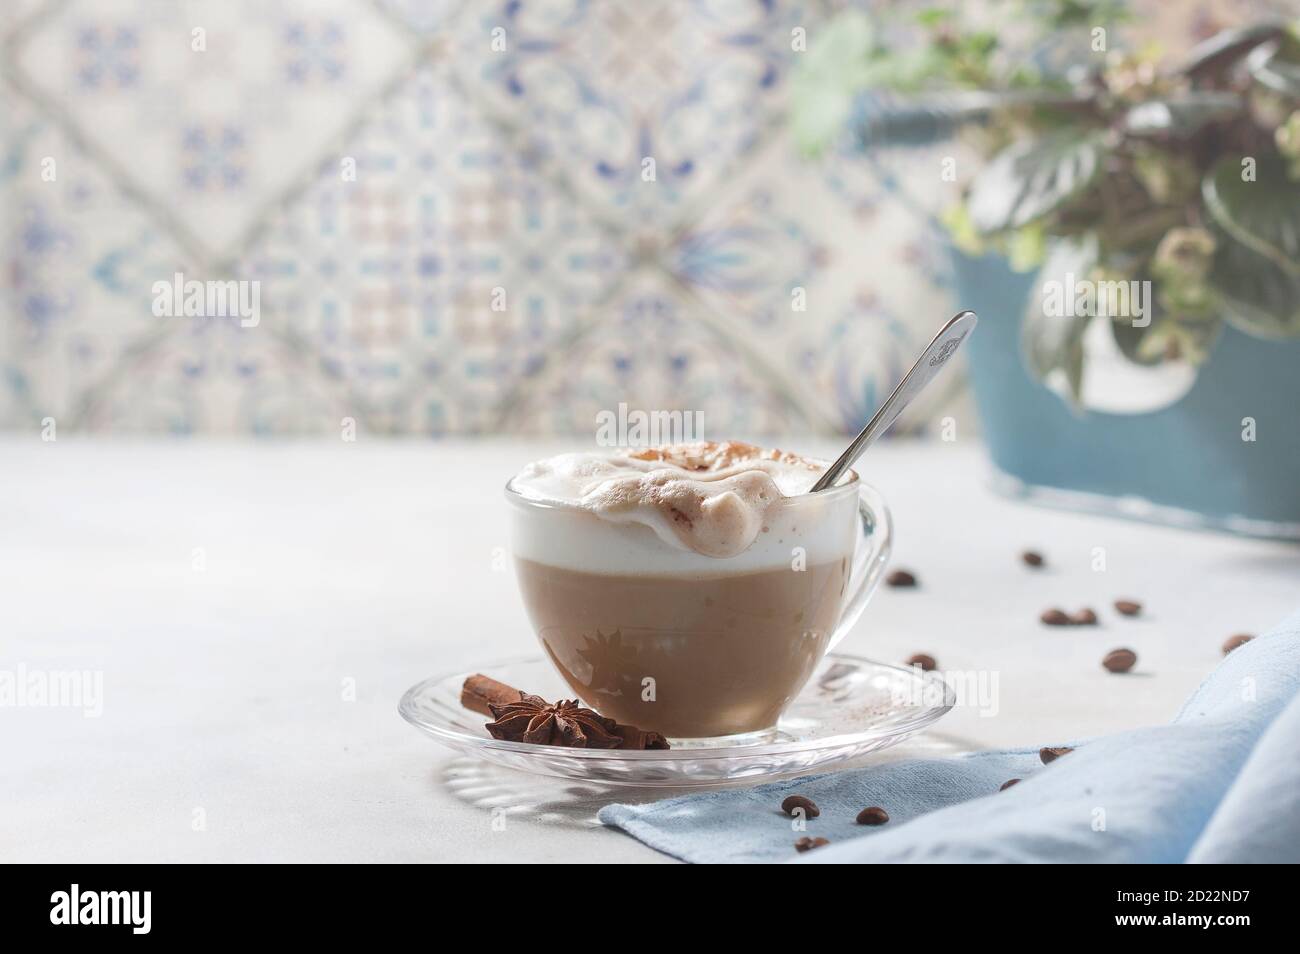 Cappuccino or latte in a glass cup on a light background. Female hand with a spoon Stock Photo